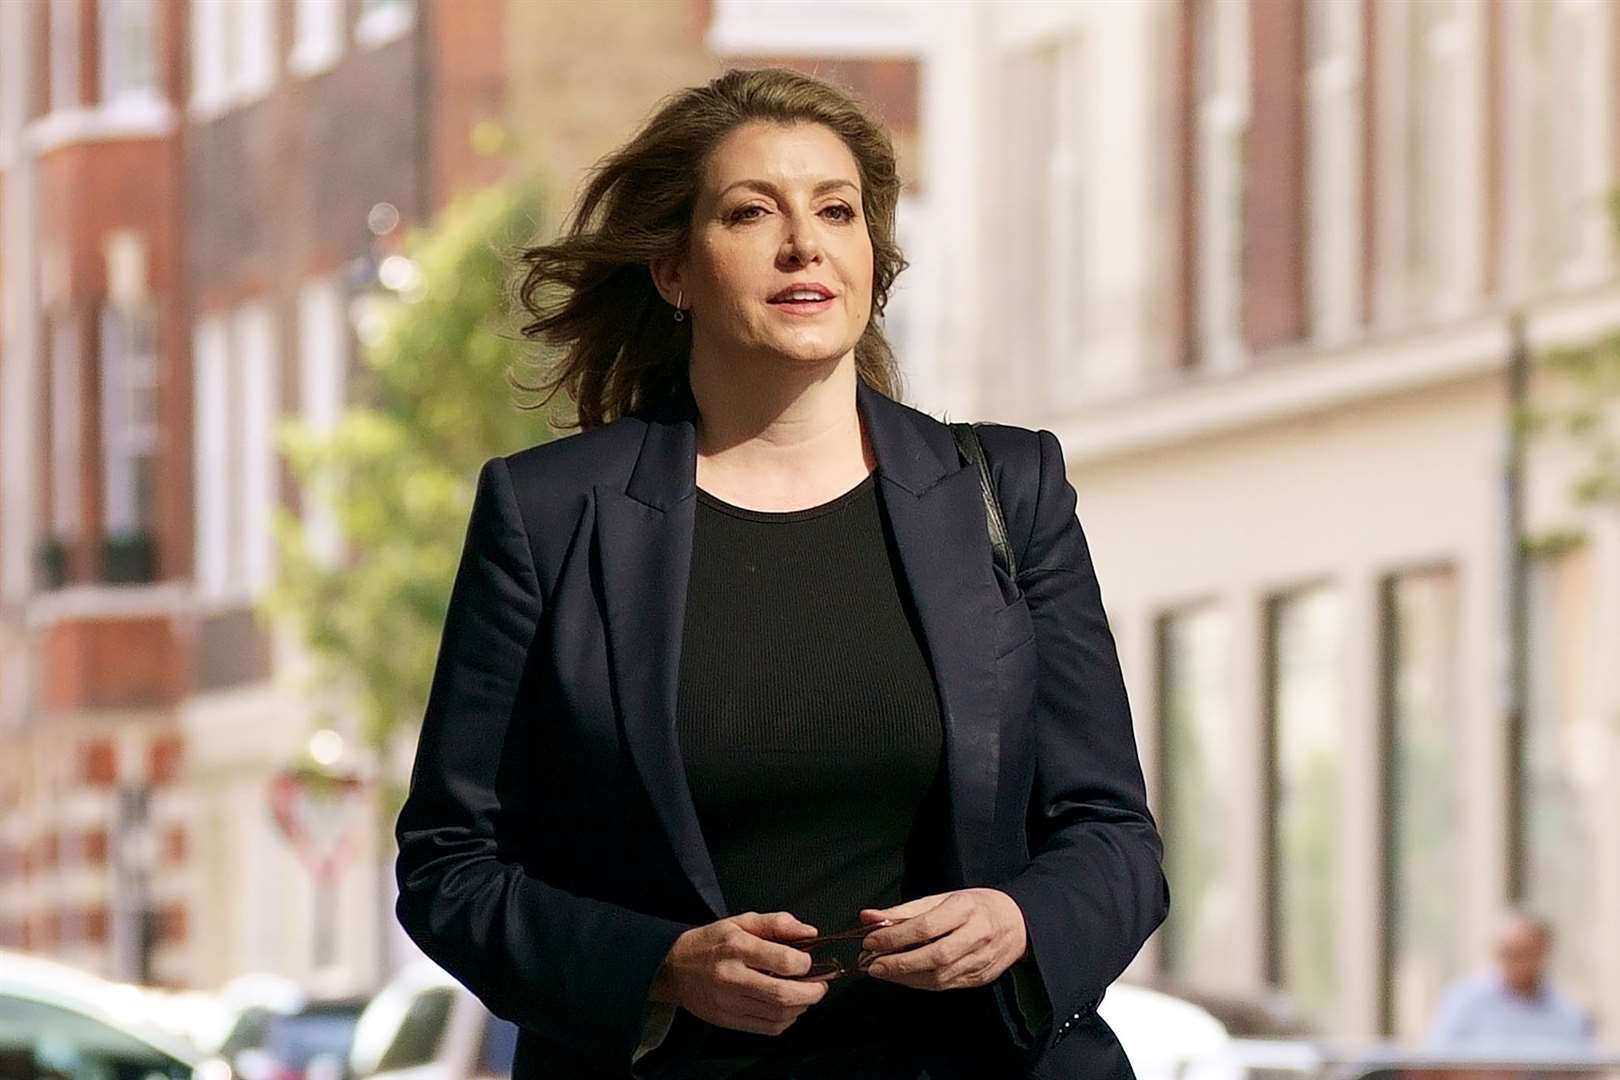 Penny Mordaunt has finished second in each round of voting but faces a fight to hold on to that spot (Victoria Jones/PA)